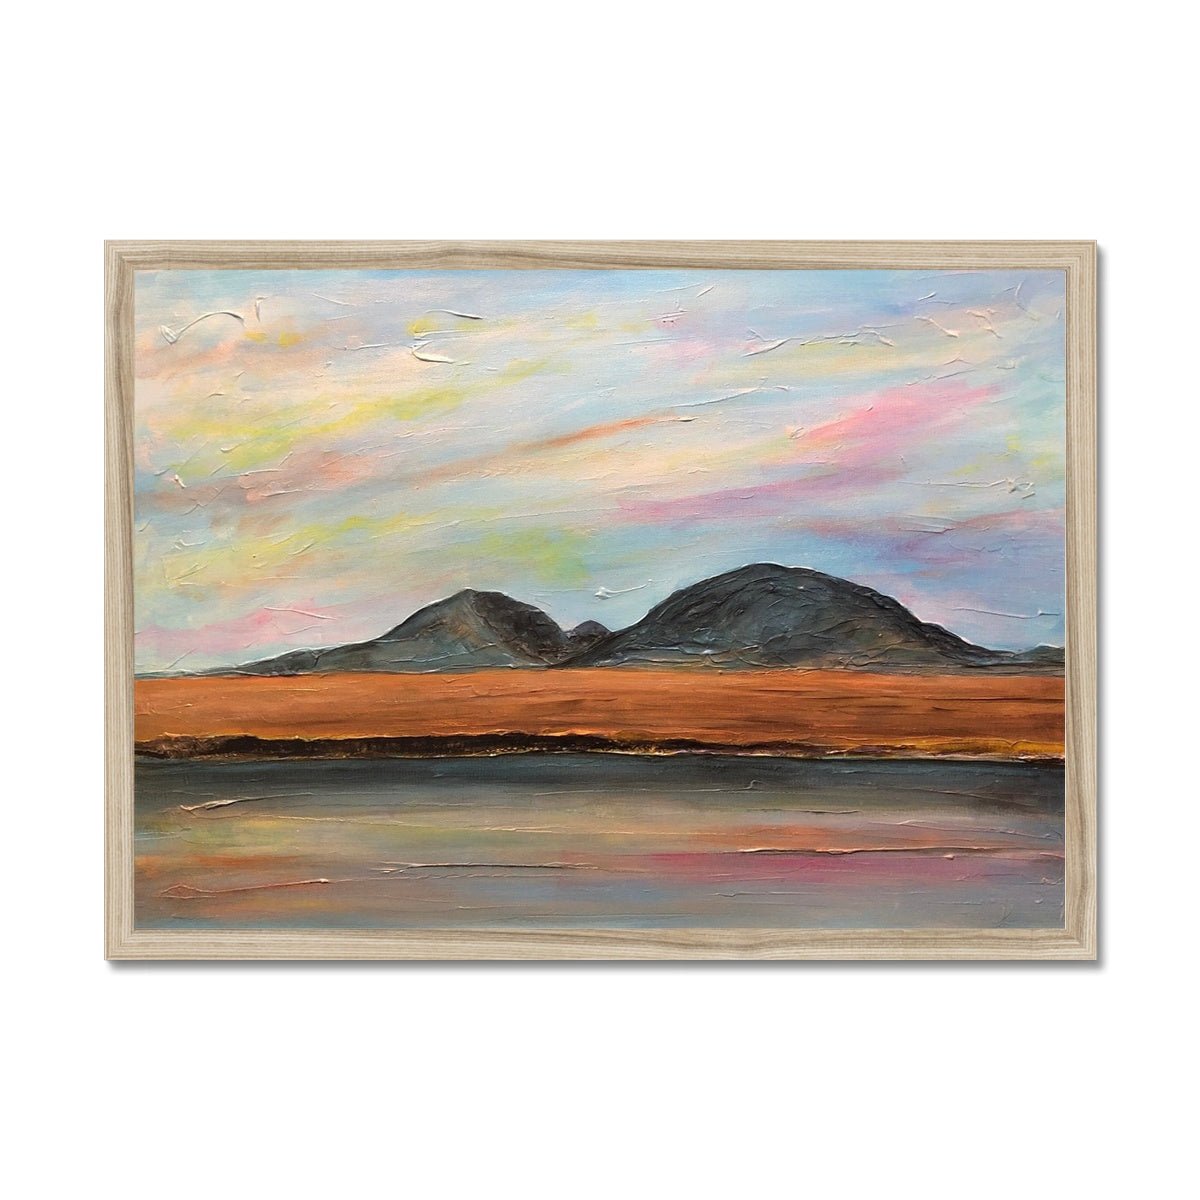 Jura Dawn Painting | Framed Prints From Scotland-Framed Prints-Hebridean Islands Art Gallery-A2 Landscape-Natural Frame-Paintings, Prints, Homeware, Art Gifts From Scotland By Scottish Artist Kevin Hunter